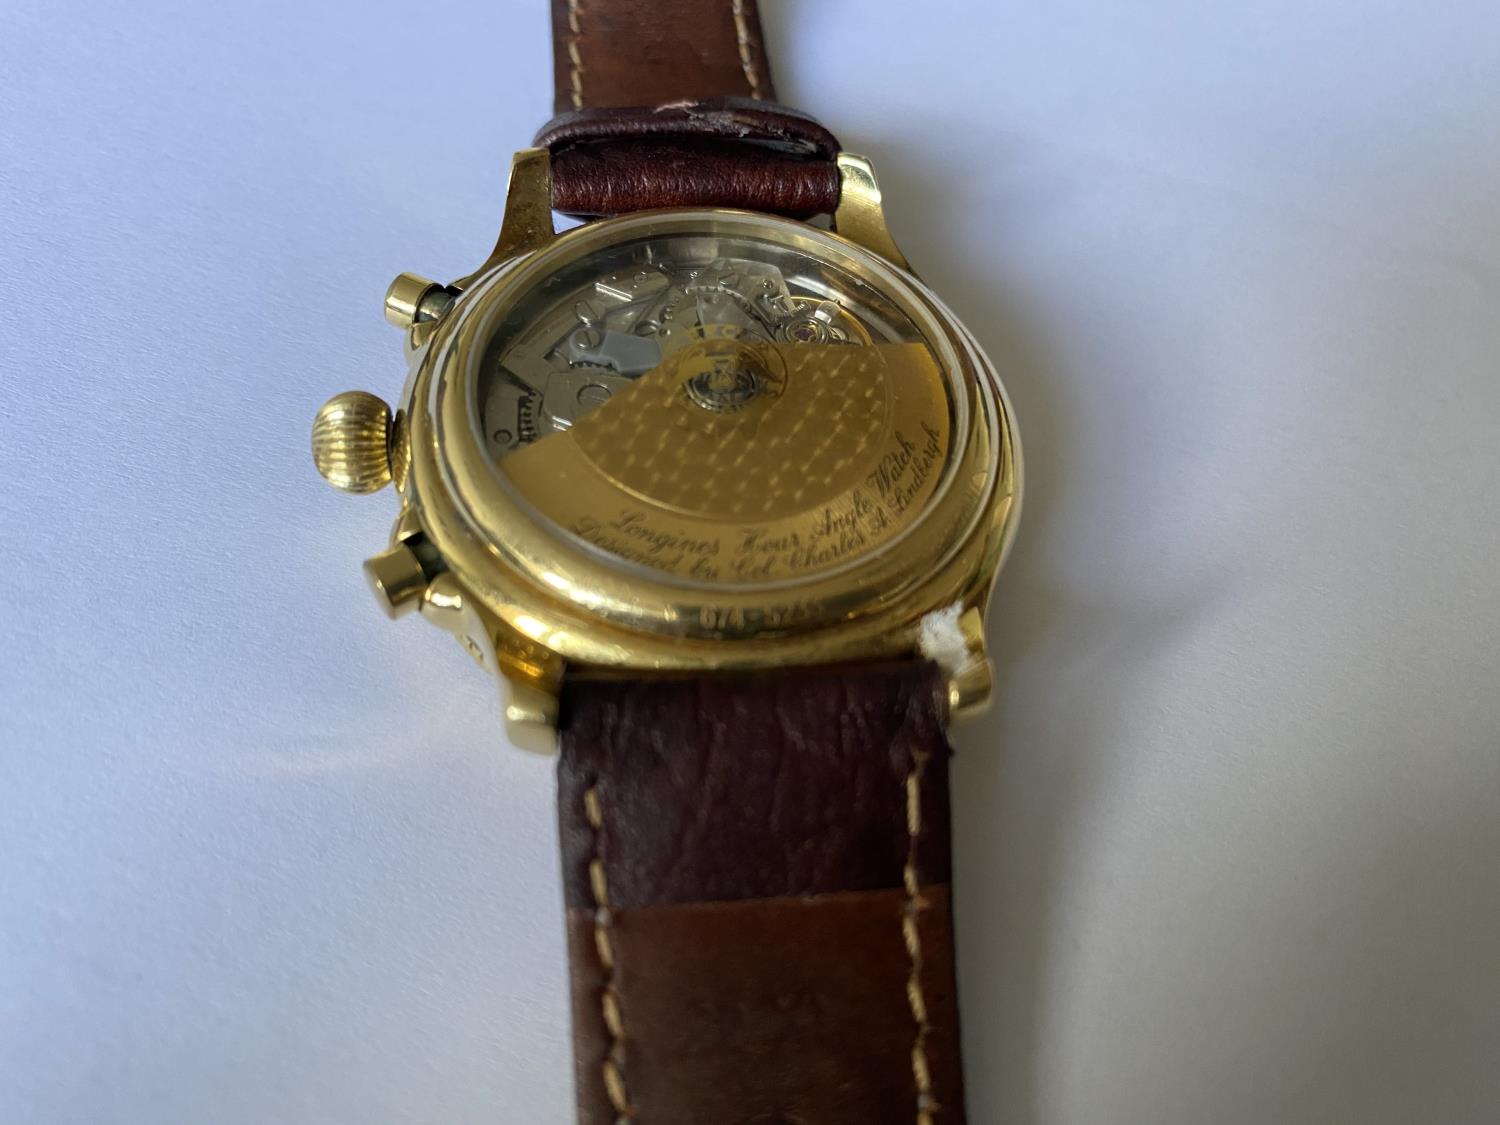 A LONGINES LINDEBERGH HOUR ANGLE WRIST WATCH WITH SOLID YELLOW GOLD CASE AND BEZEL, AUTOMATIC - Image 4 of 12